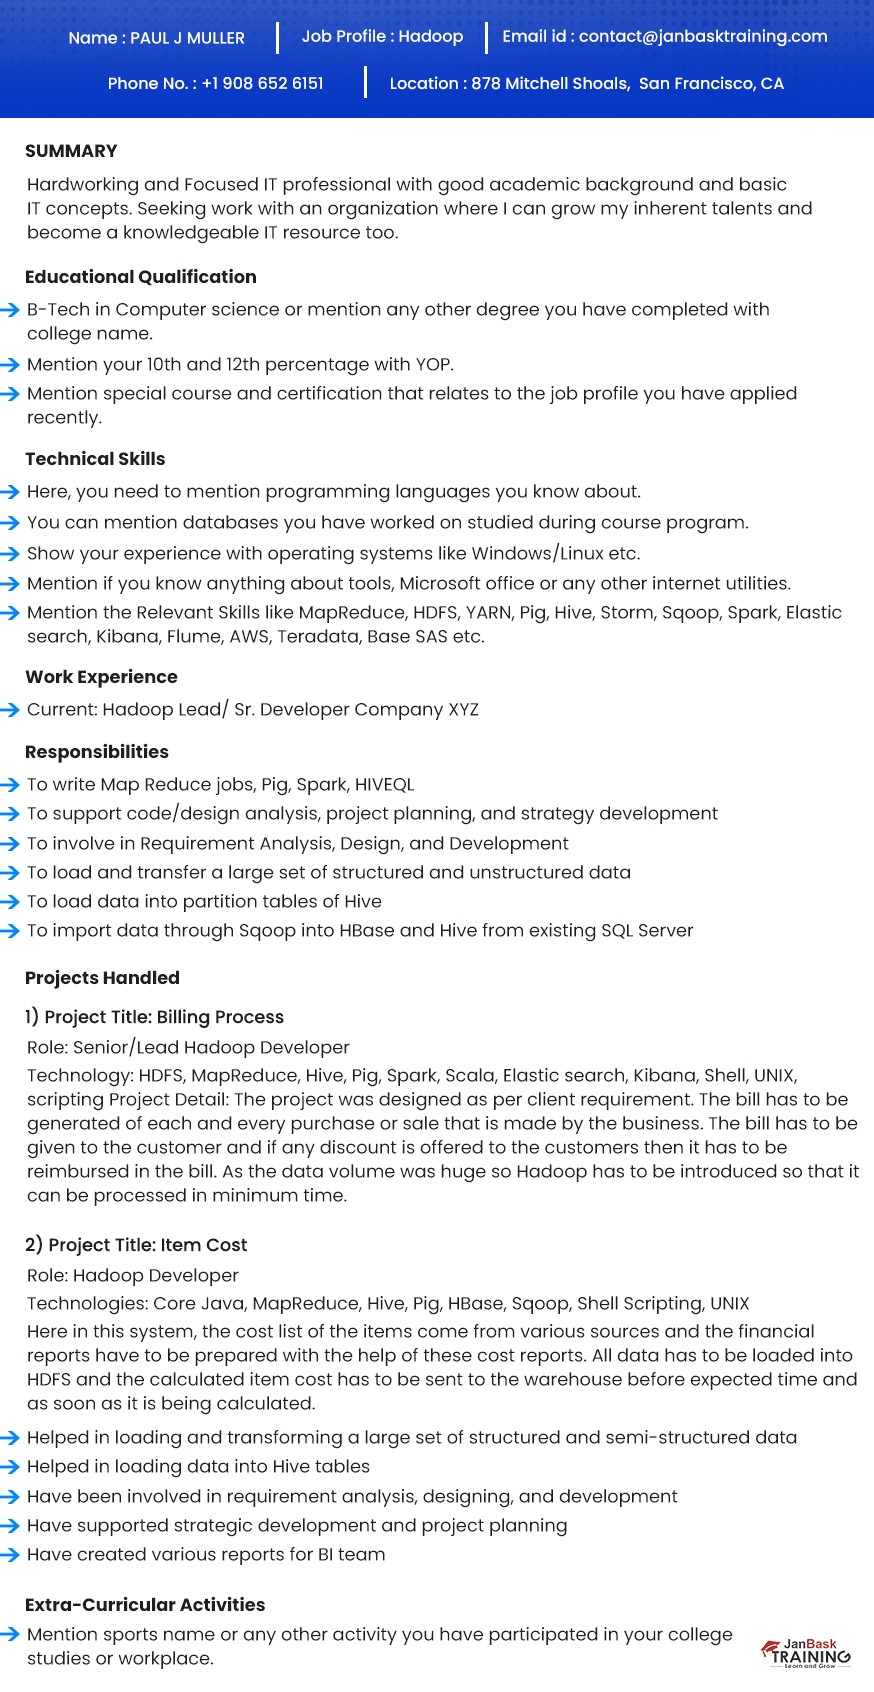 Sample Resume for Hadoop Developer Entry Level Position Chief Elements Of A Professional Hadoop Resume In 2022